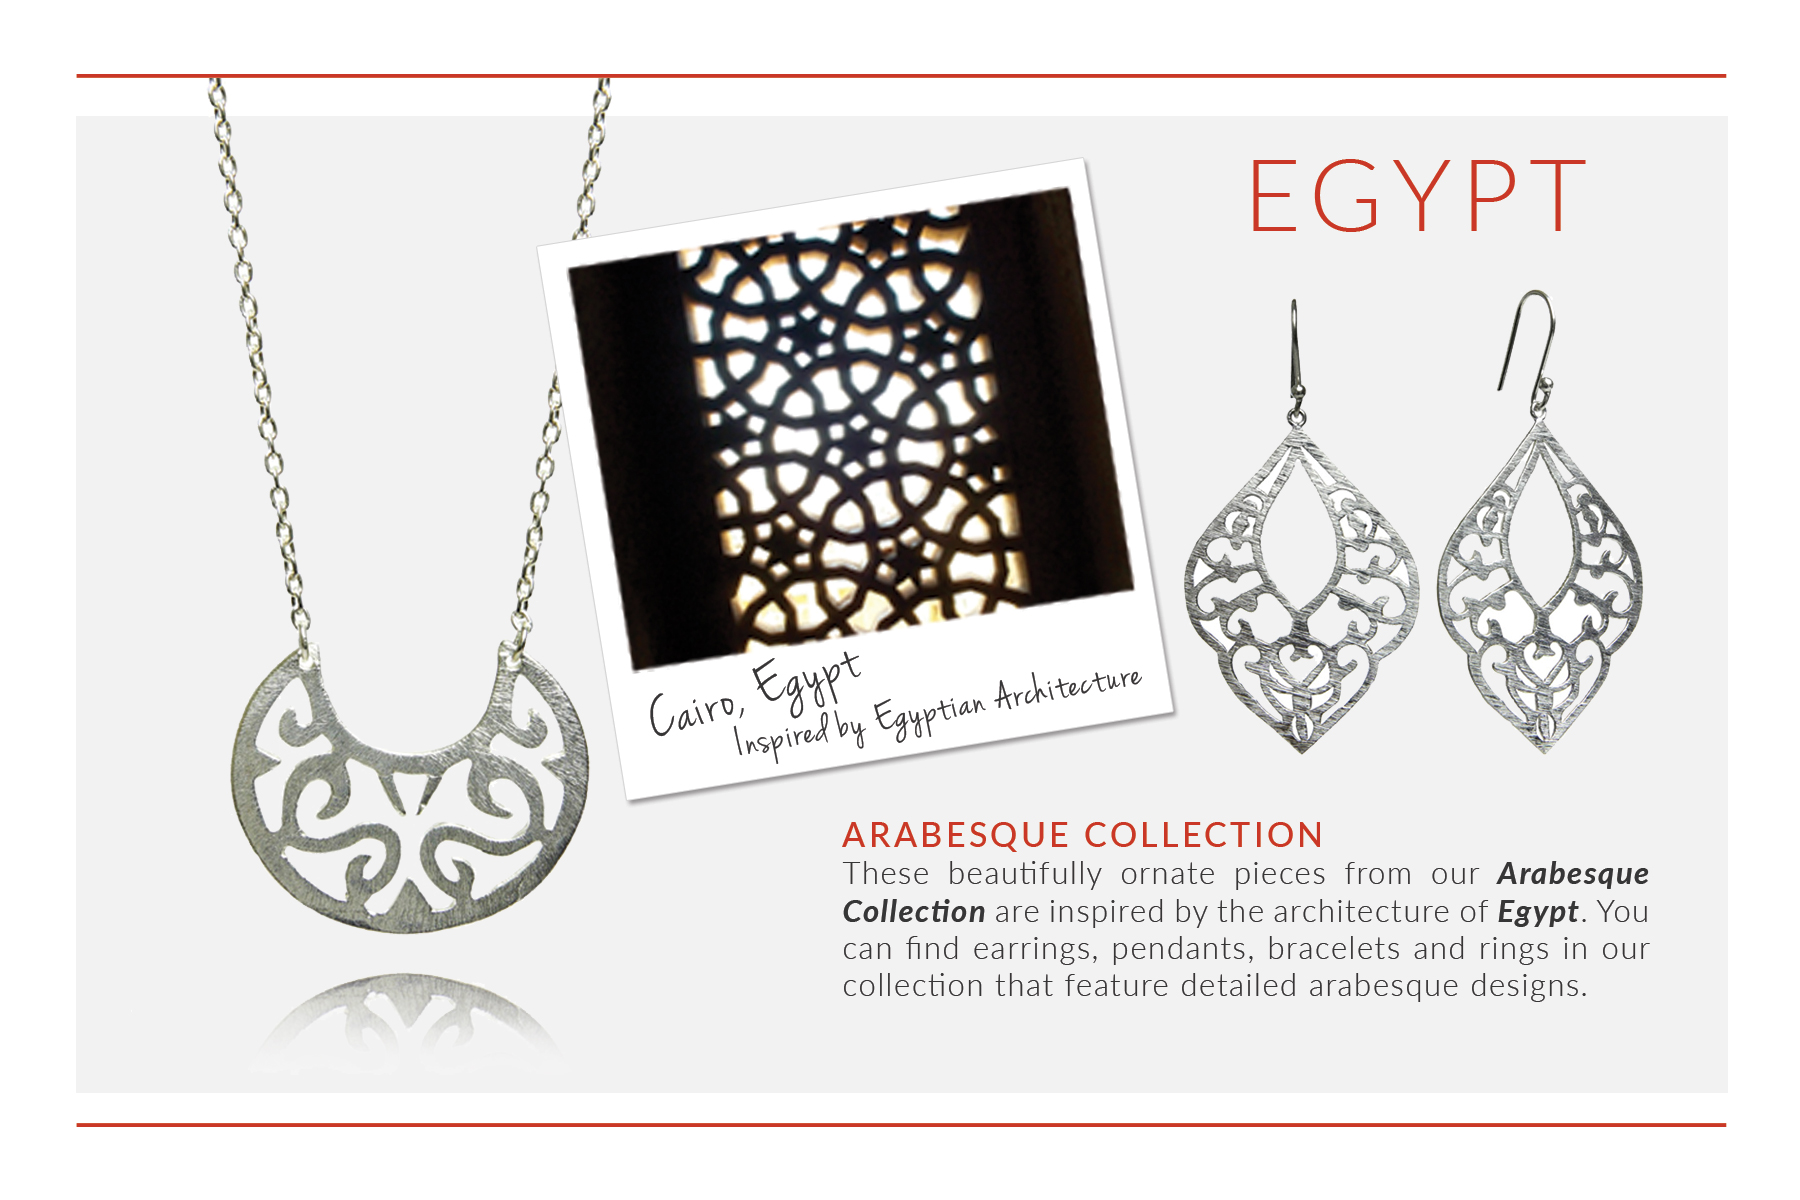 Arabesque Collection from Egypt